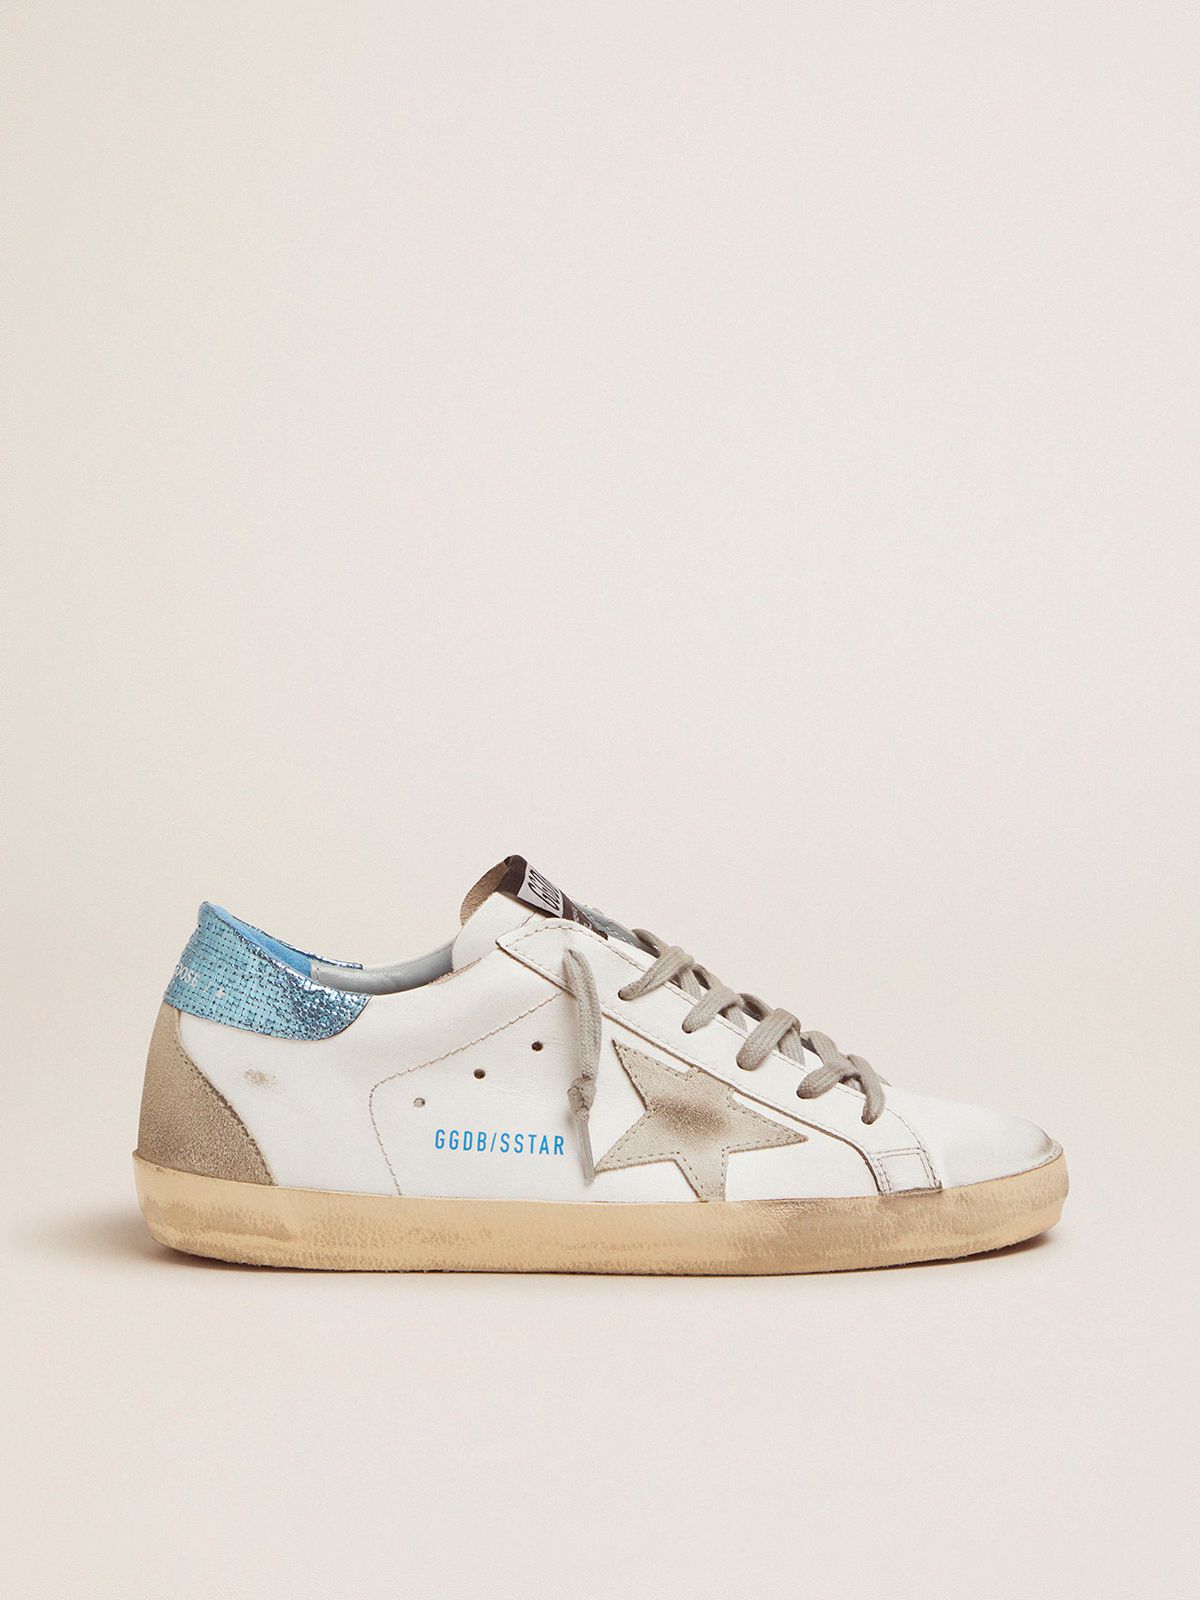 golden goose blue tab Super-Star with sneakers heel laminated LTD White